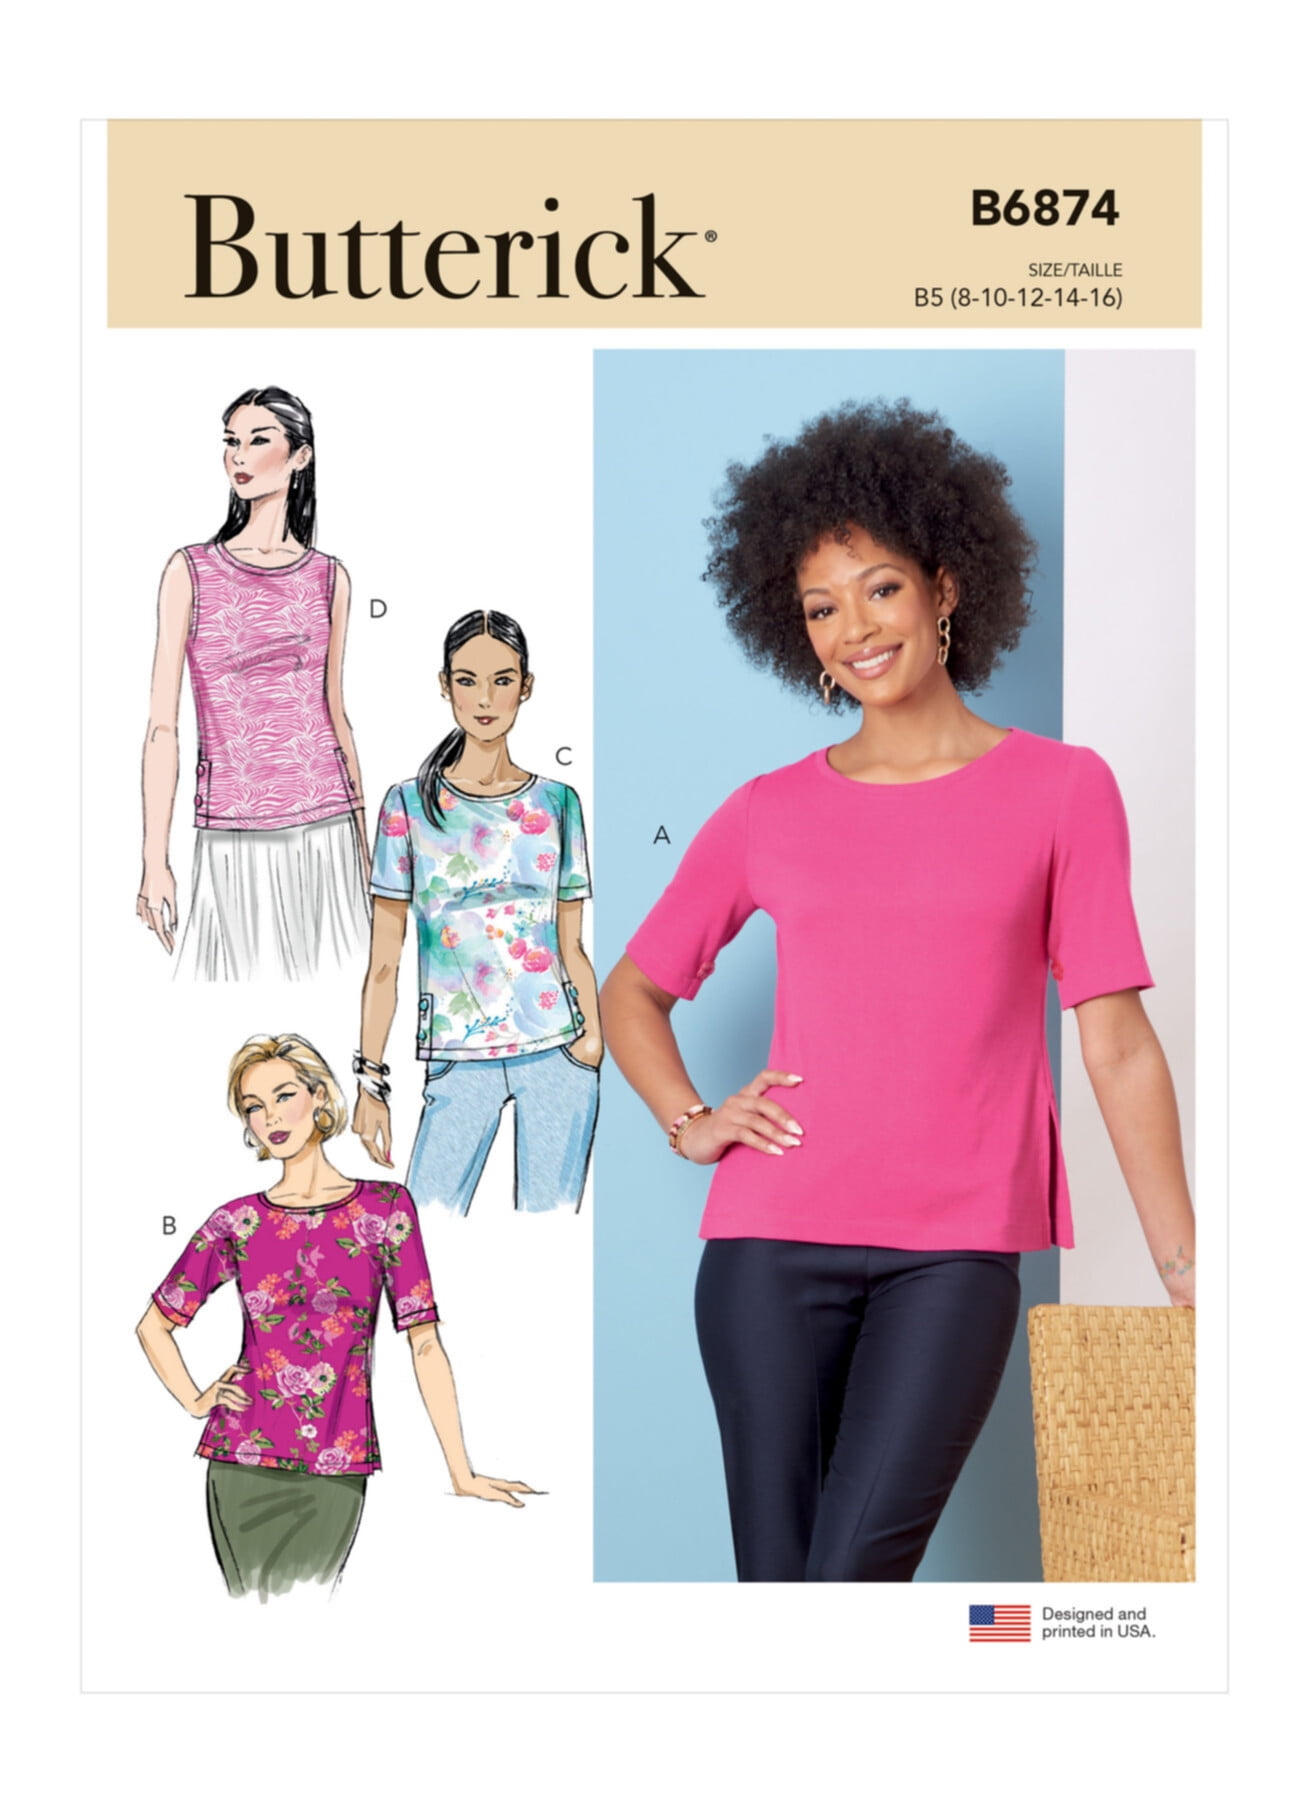 Butterick Sewing Pattern B6874 - Misses' Knit Tops, Size: B5 (8-10-12 ...